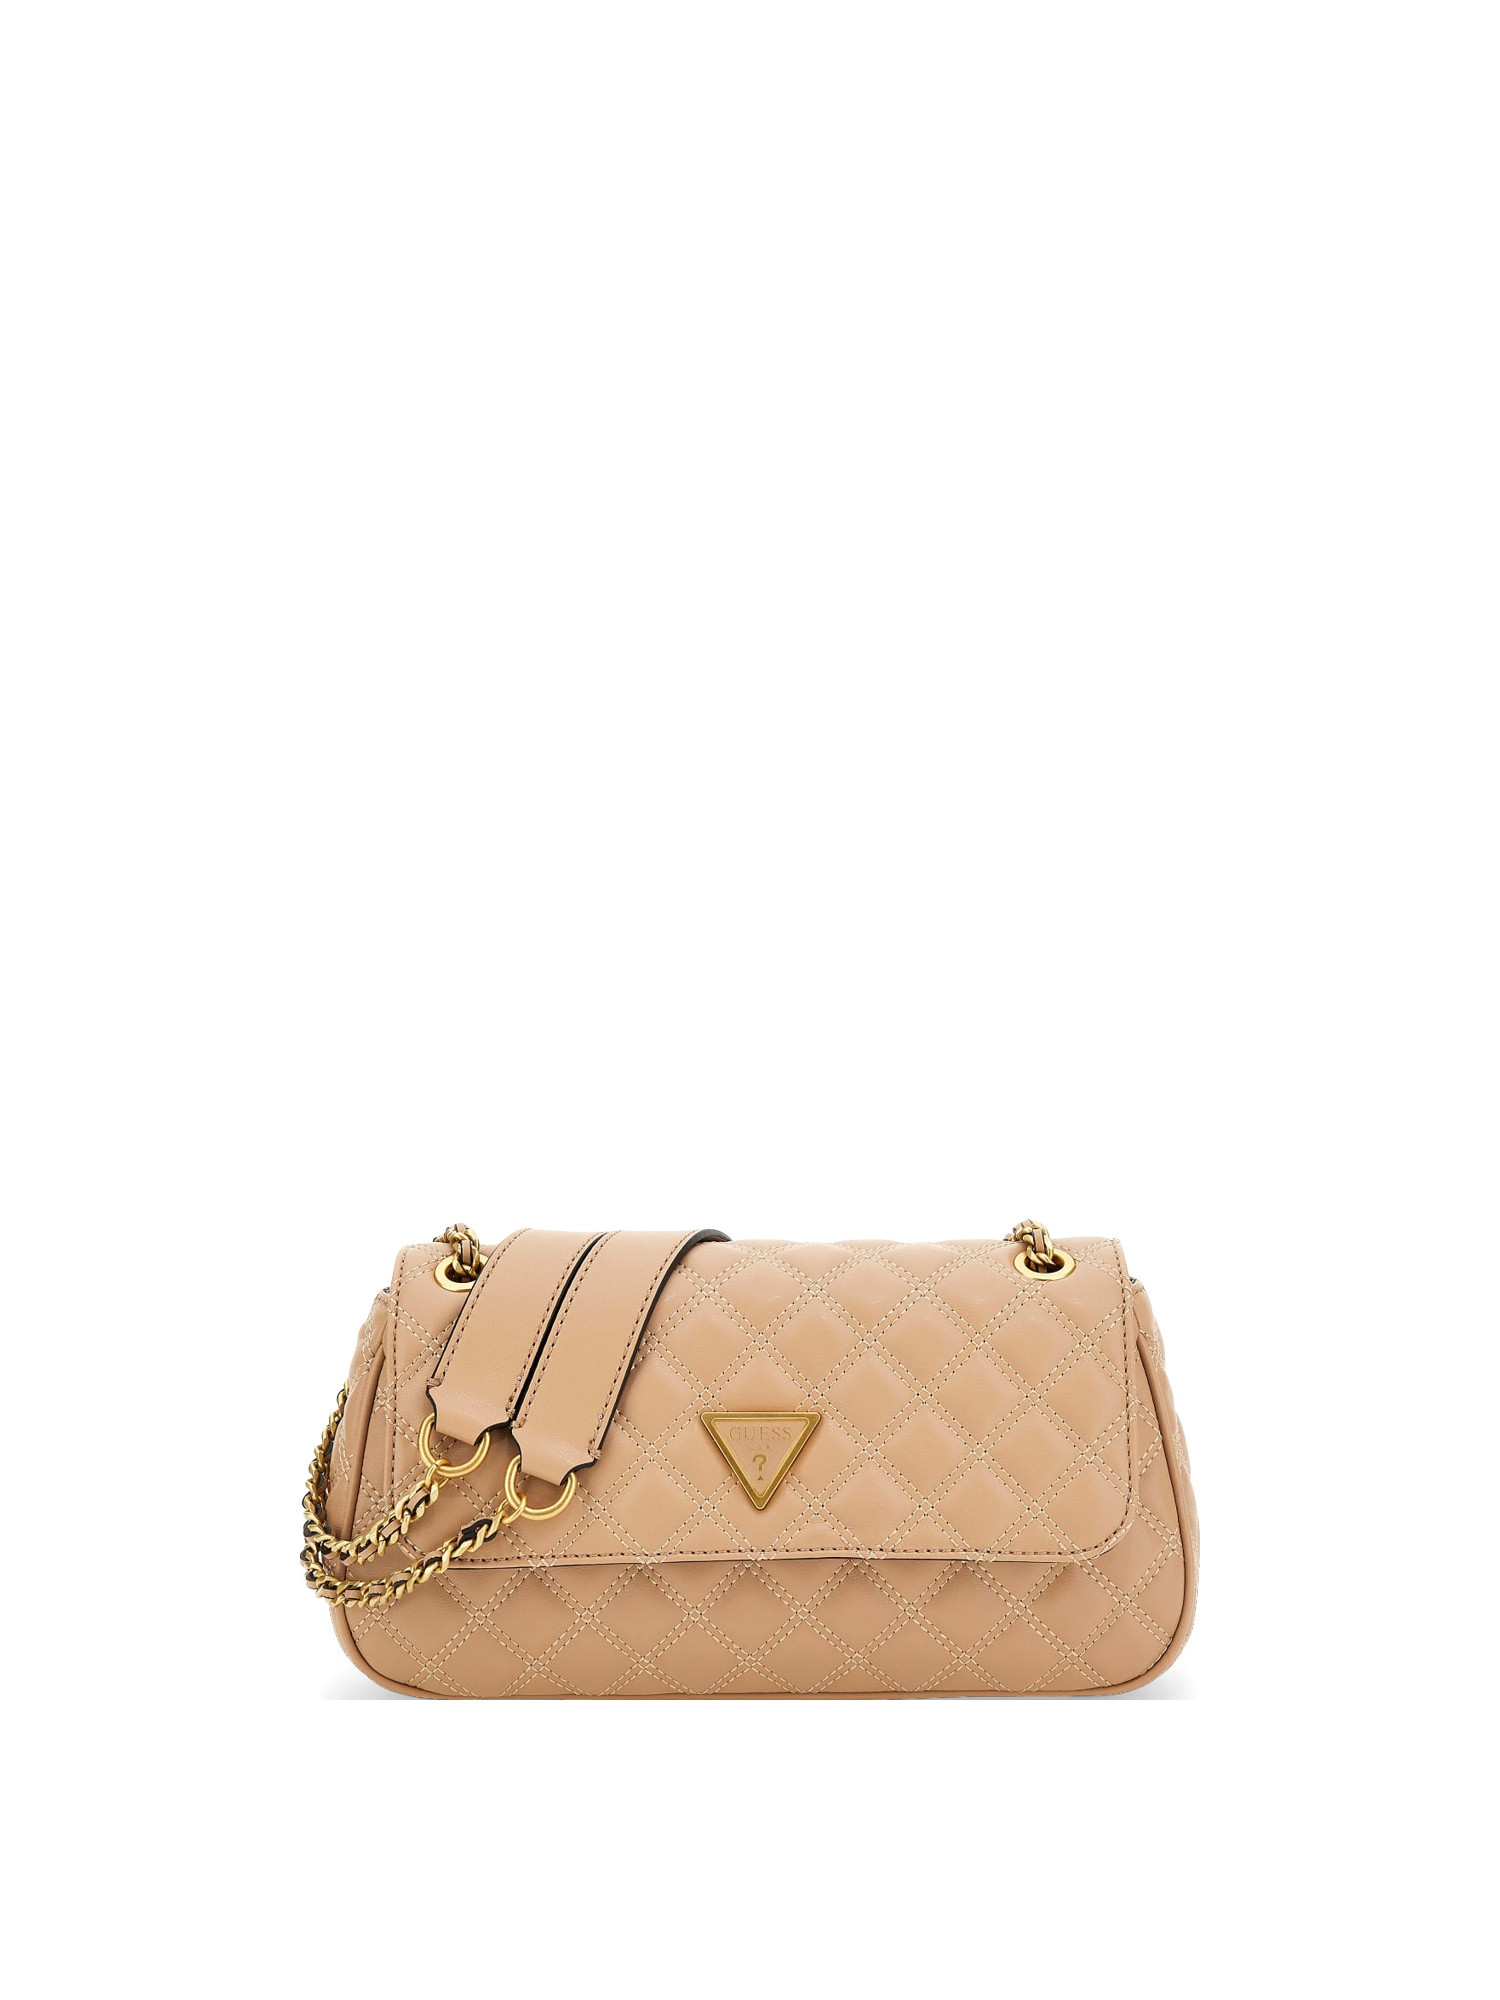 Guess - Borsa a tracolla trapuntata Giully, Beige, large image number 0